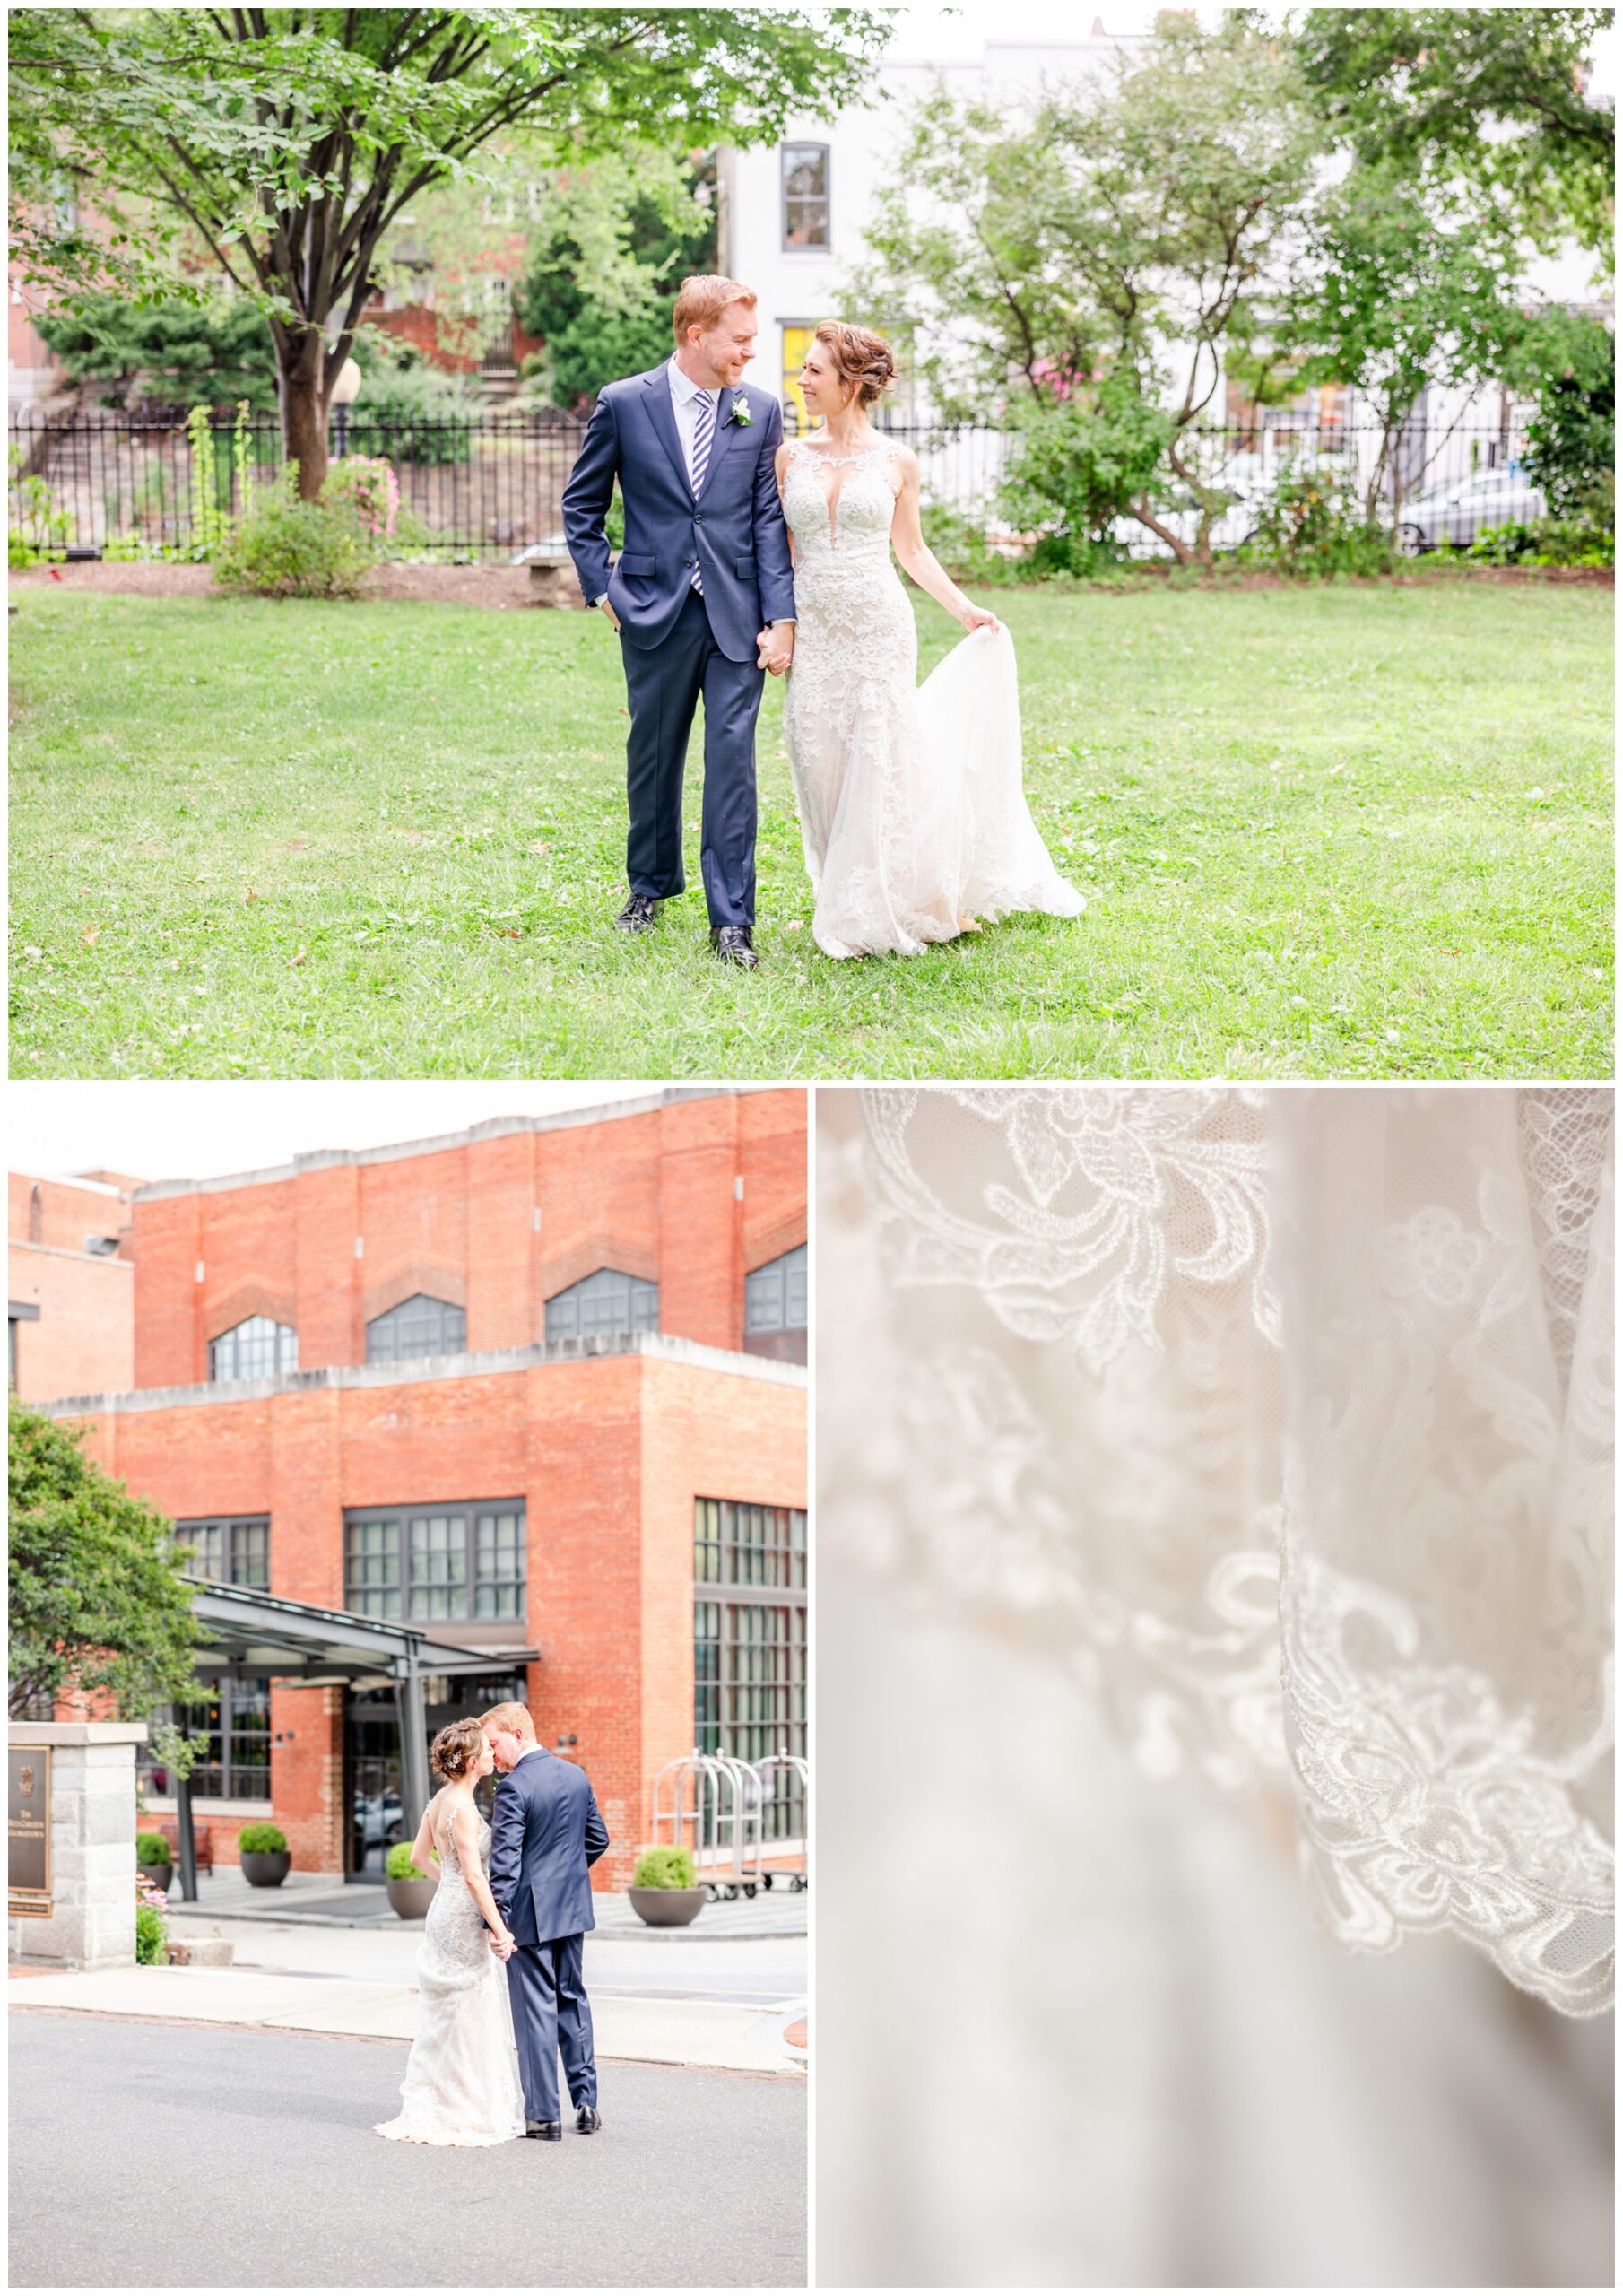 romantic Ritz Carlton Georgetown wedding, summer wedding aesthetic, green and white aesthetic, summer D.C. wedding, D.C. wedding venues, Ritz Carlton wedding, Washington D.C. wedding, romantic wedding aesthetic, Georgetown wedding, Rachel E.H. Photography, D.C. photographer, couple holding hands and walking towards camera, white lace of dress, couple kissing in front of wedding venue